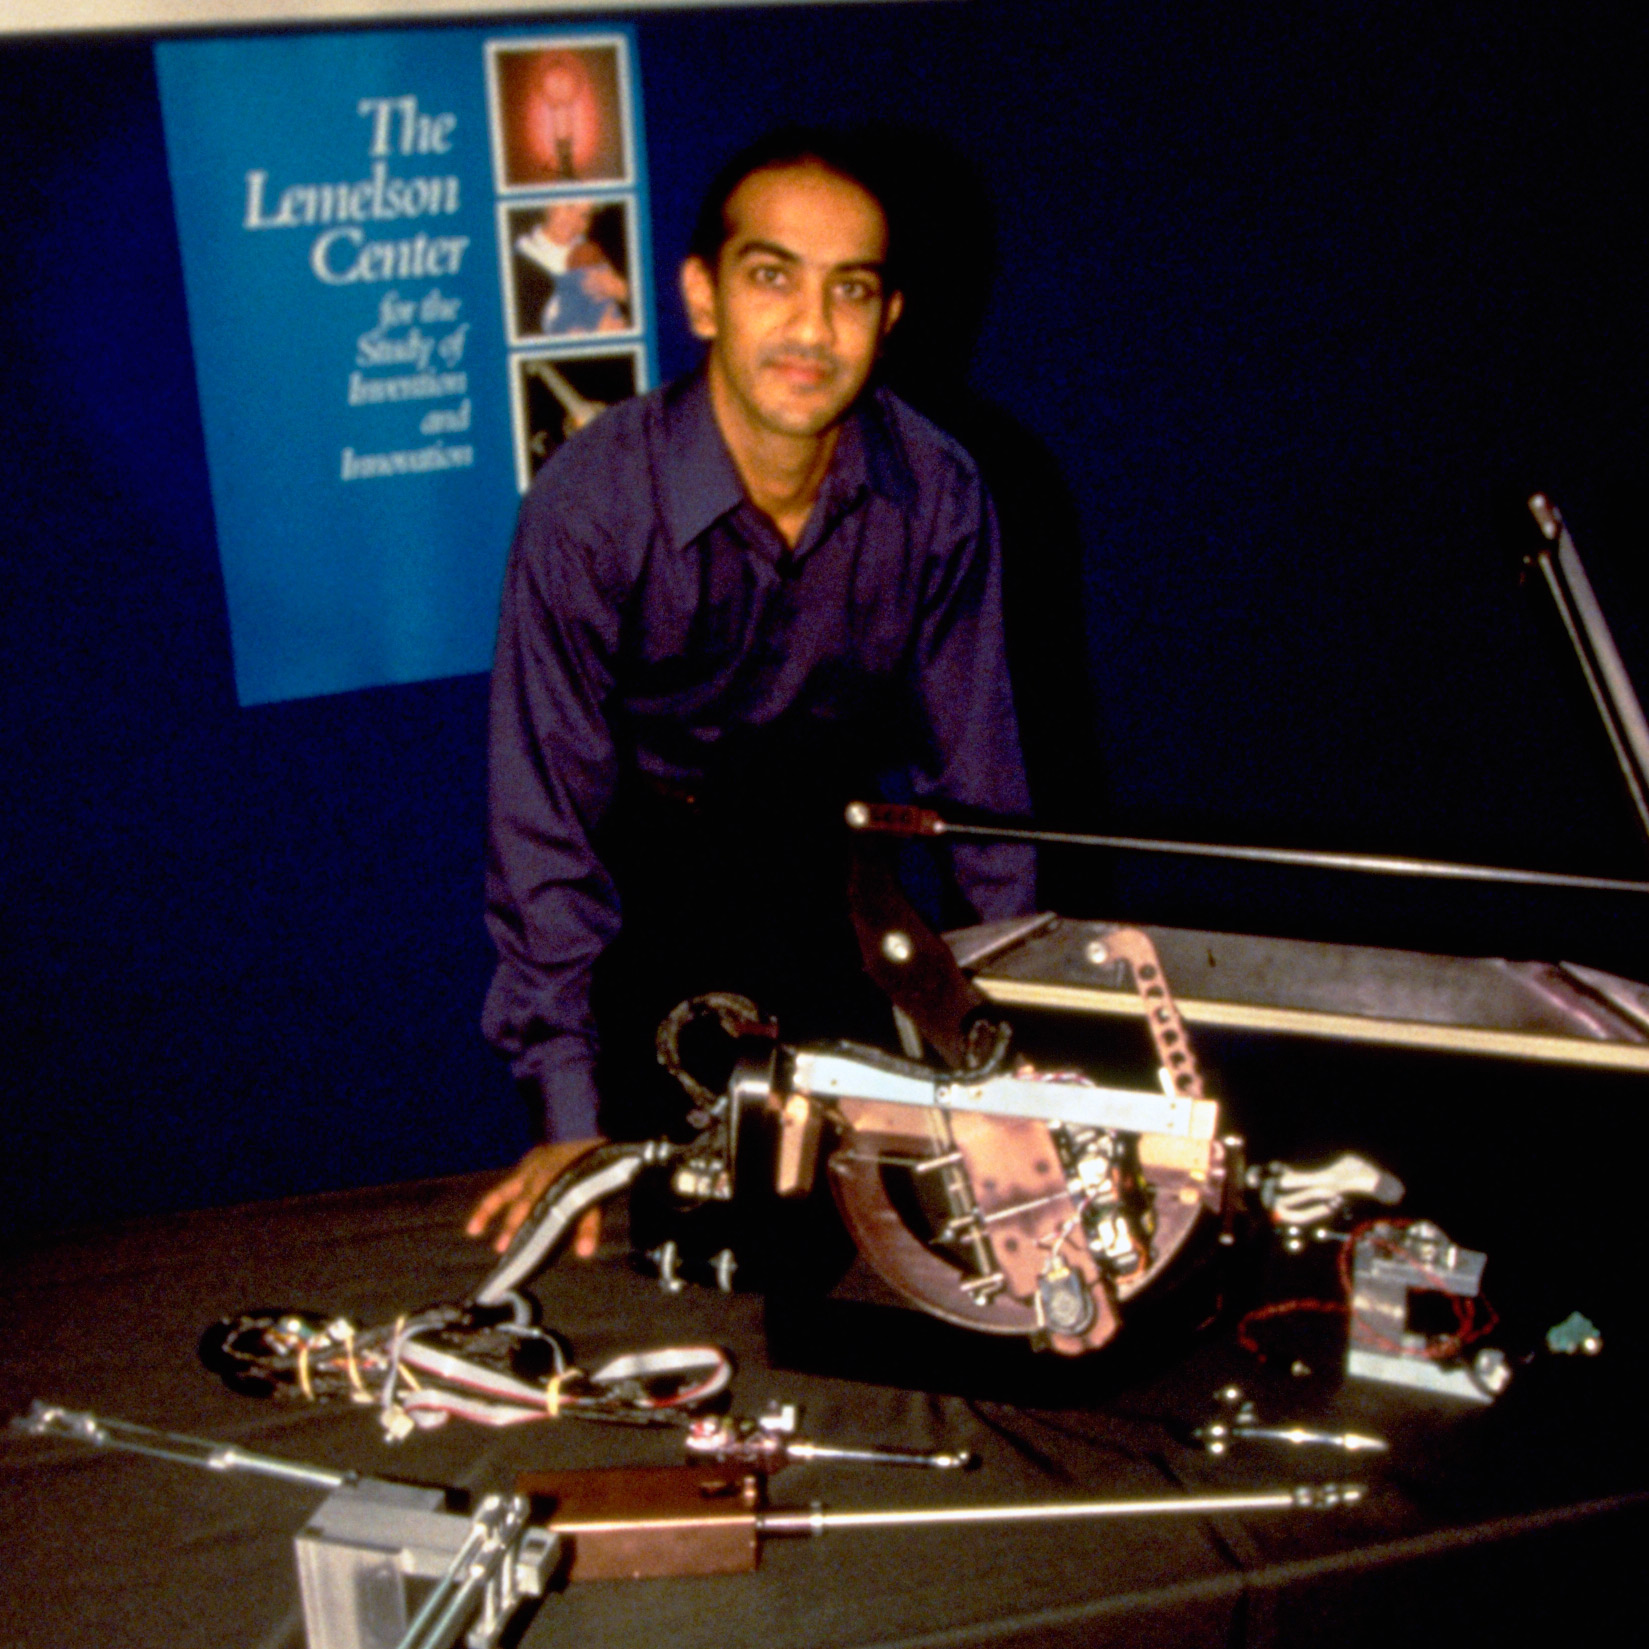 Image of Akhil Madhani with some of his robot inventions